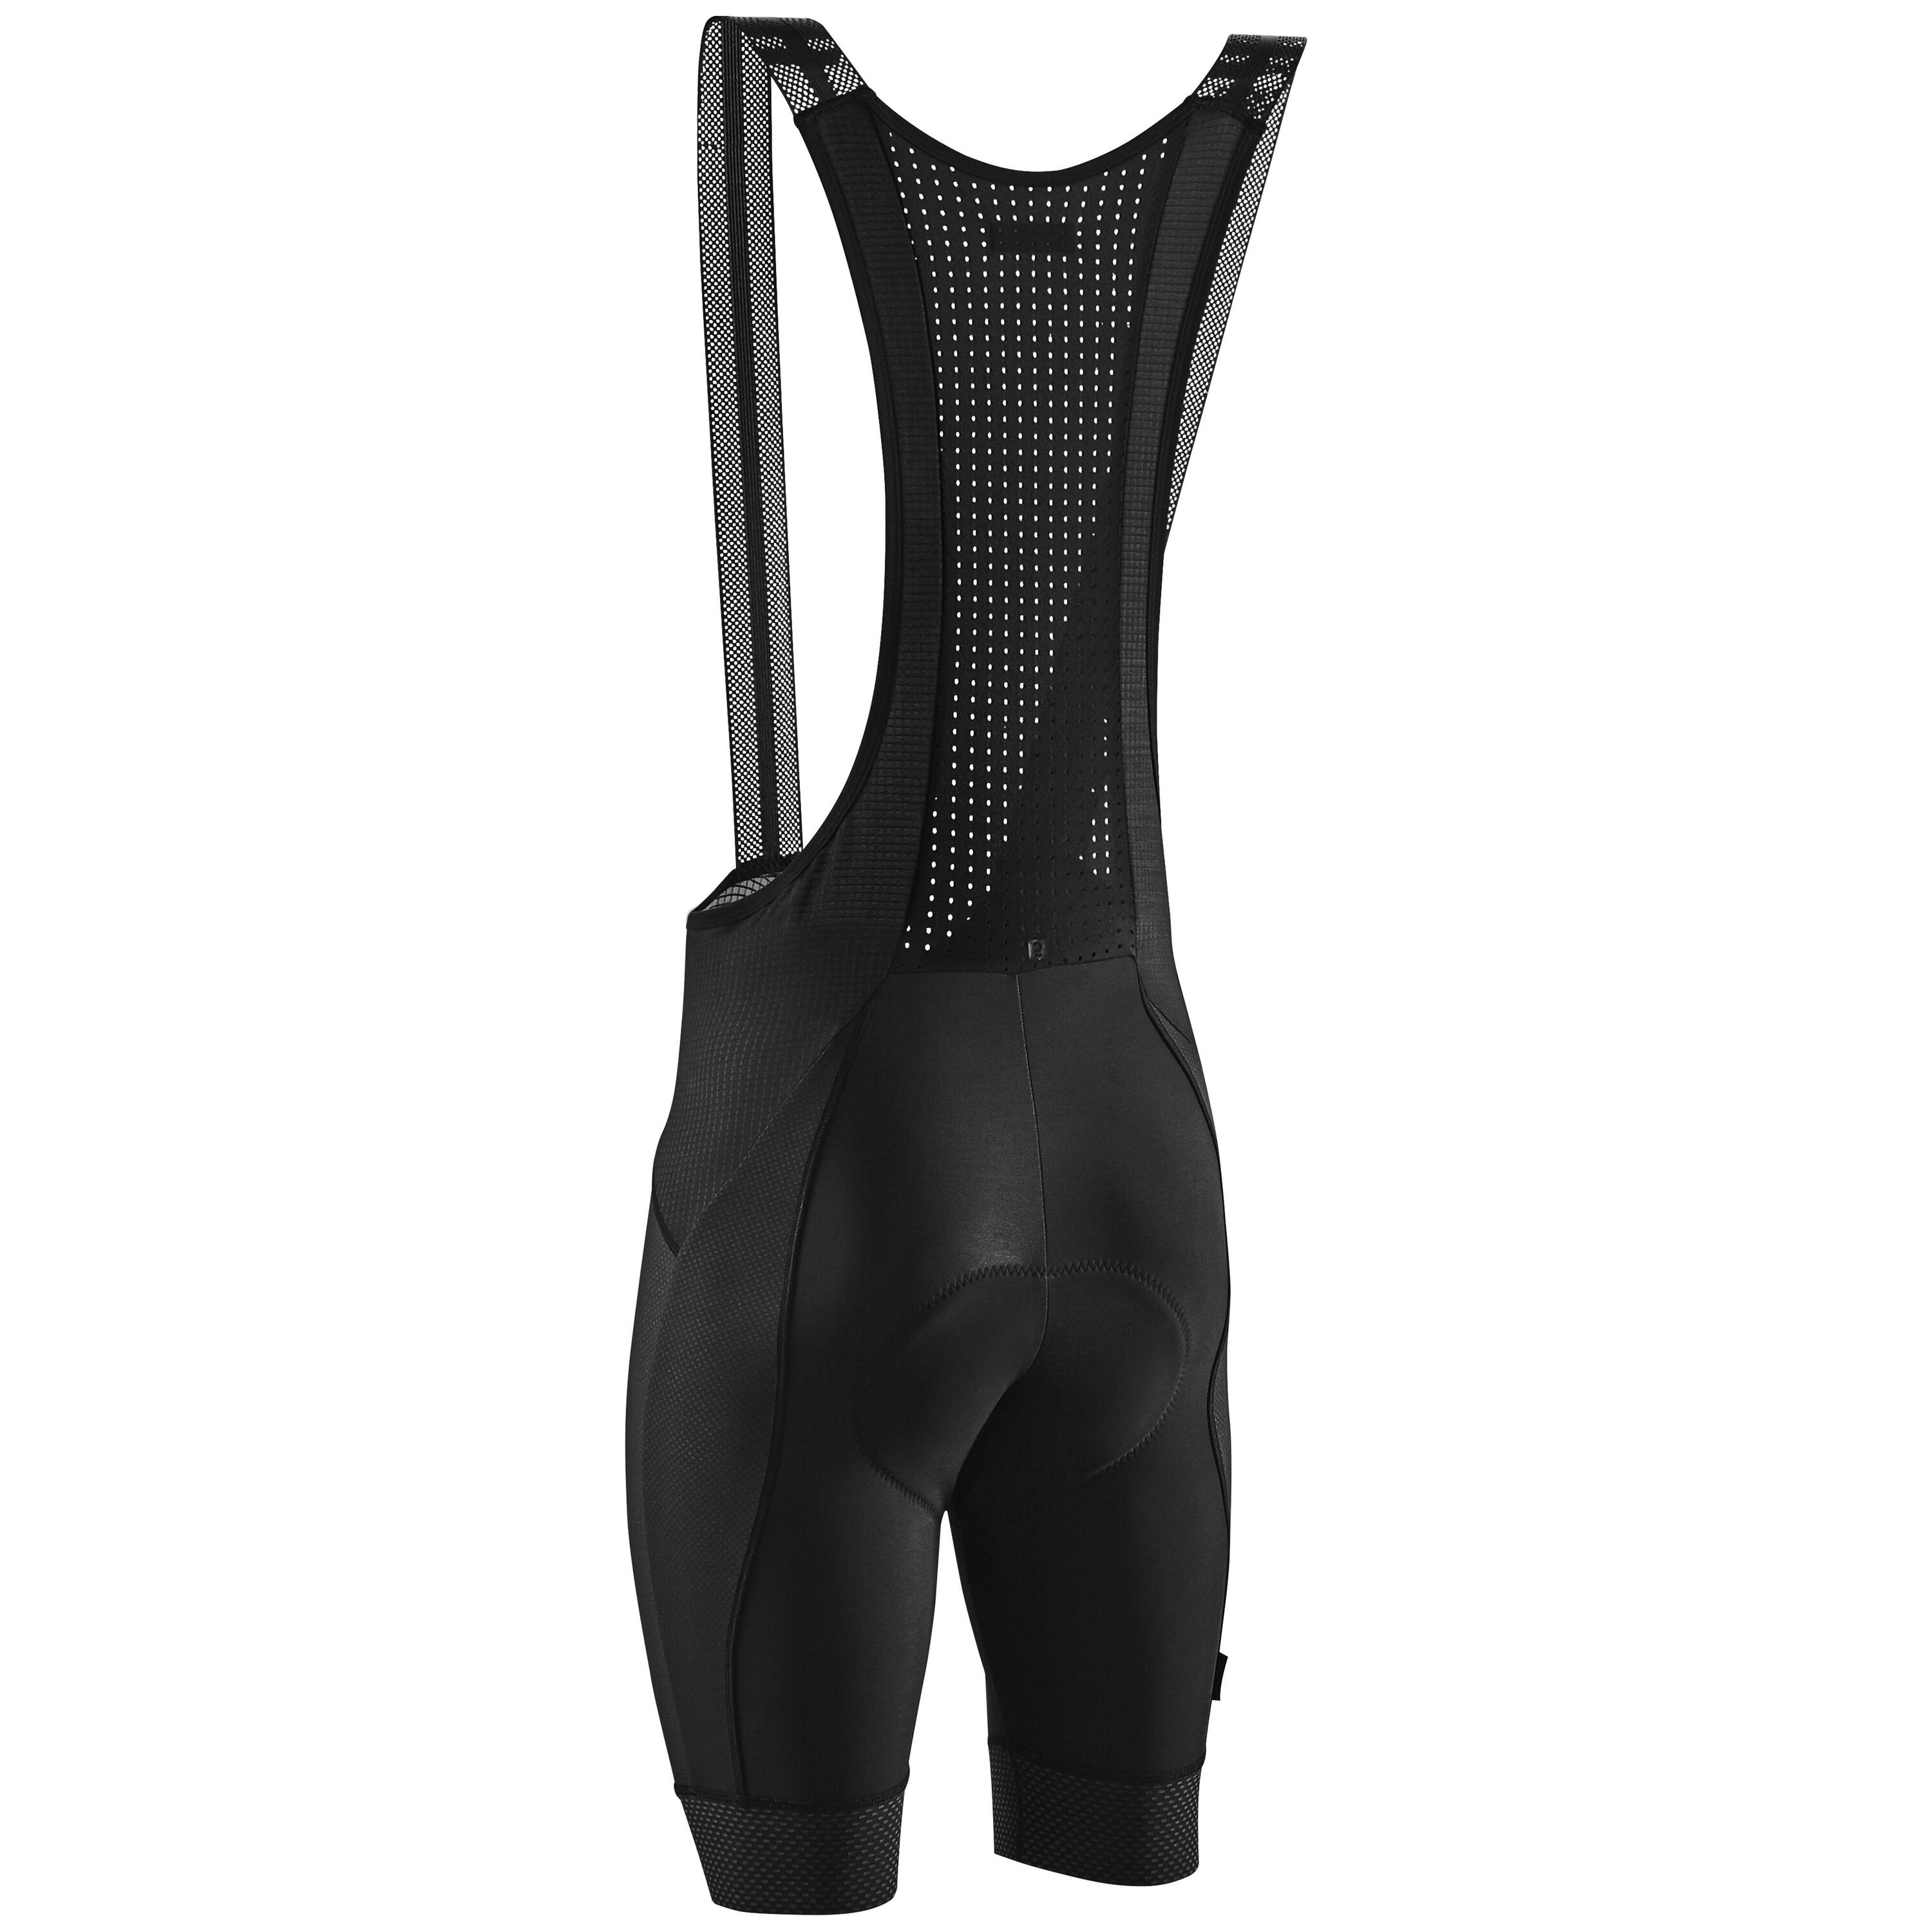 Men's Road Cycling Cool Weather Cycling Shorts 2/5